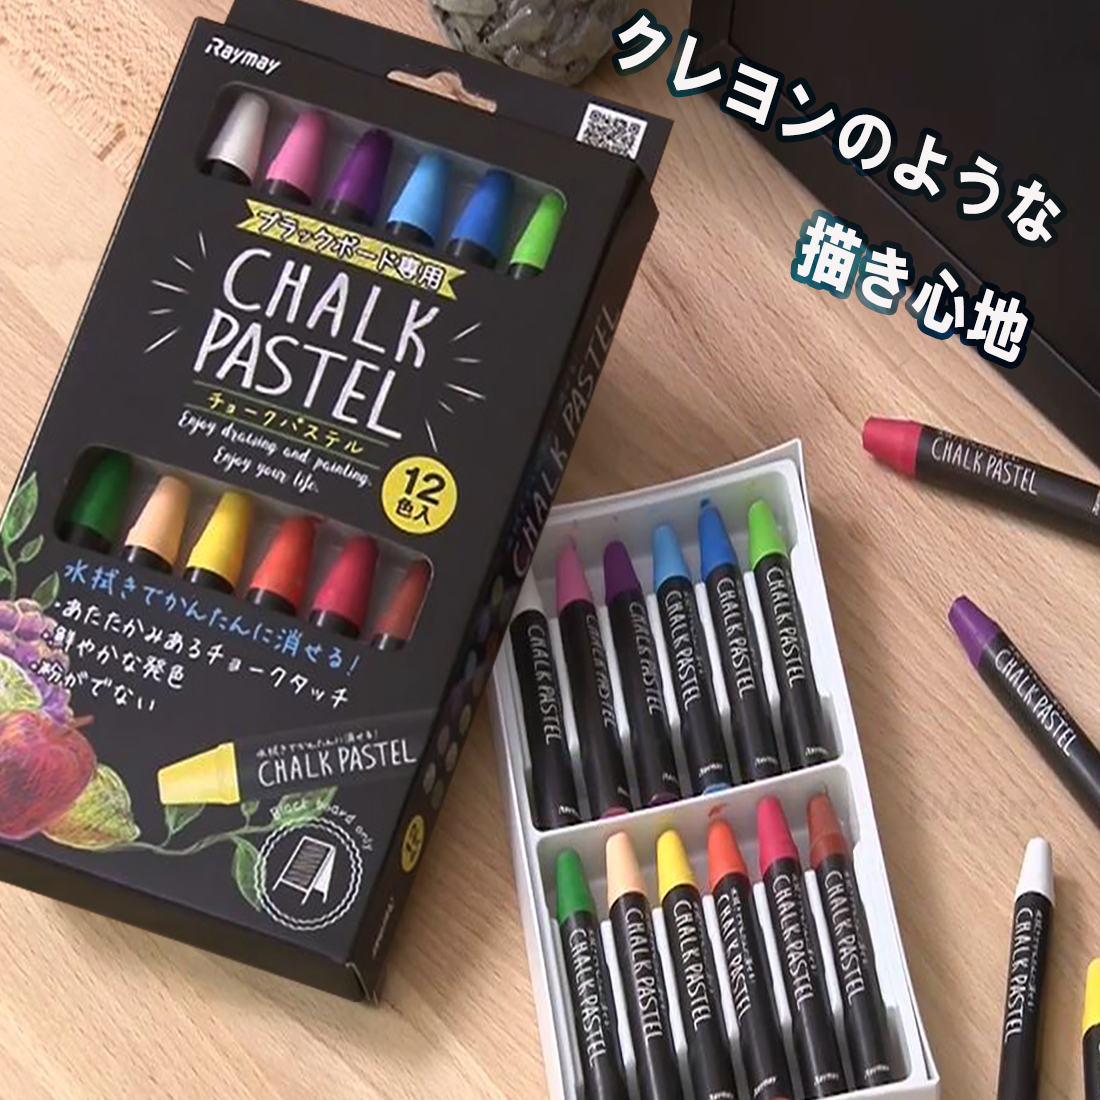  chock pastel 12 color black board for Ray mei wistaria .LBCP100 blackboard ( mail service correspondence )